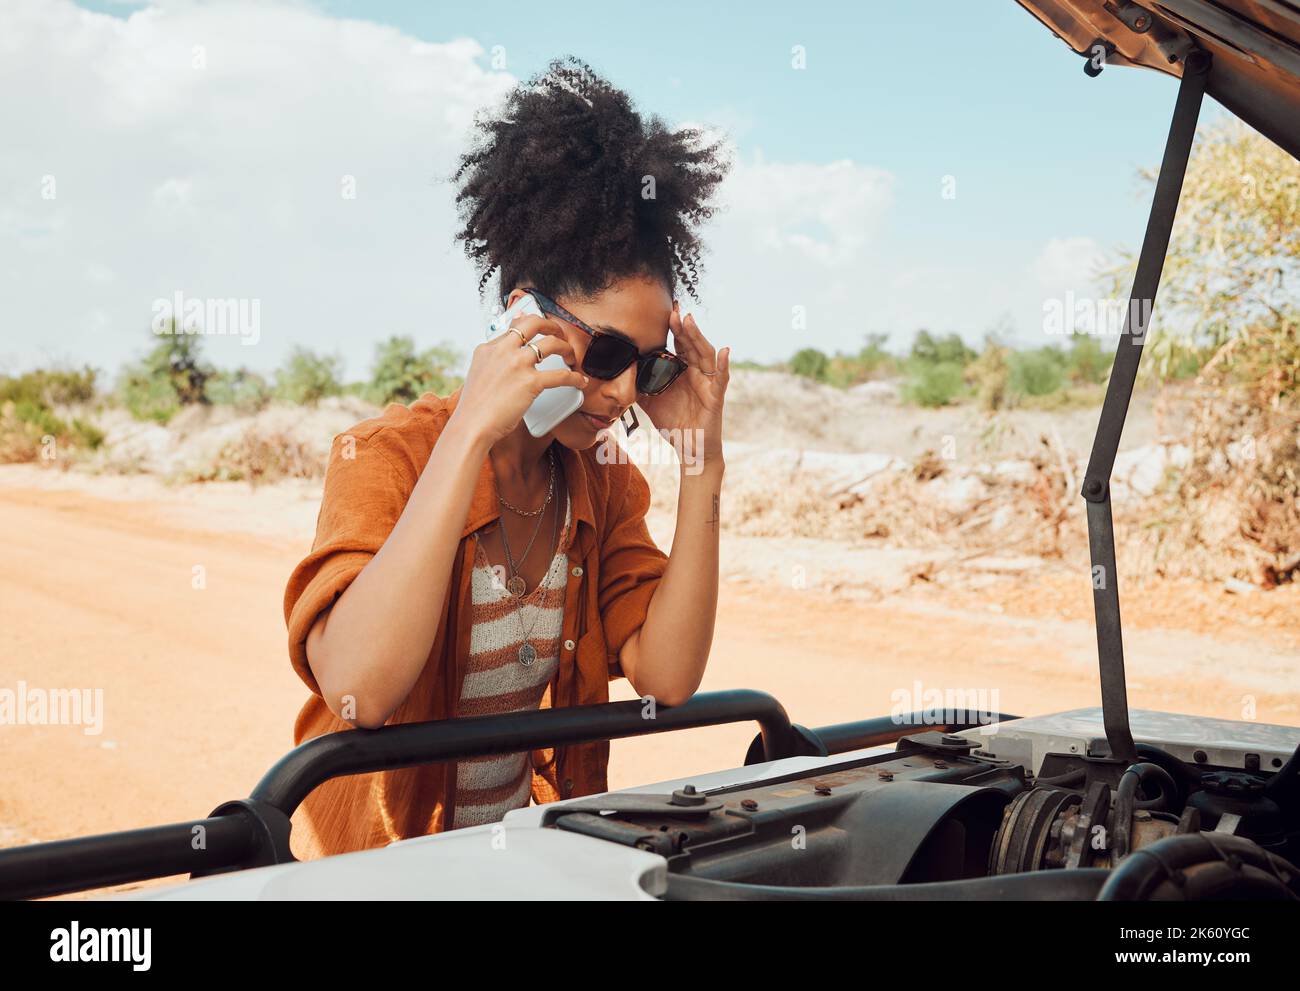 Worried woman, phone call and engine problems speaking to engineer or mechanic on a desert road in nature. Stressed black female calling roadside Stock Photo